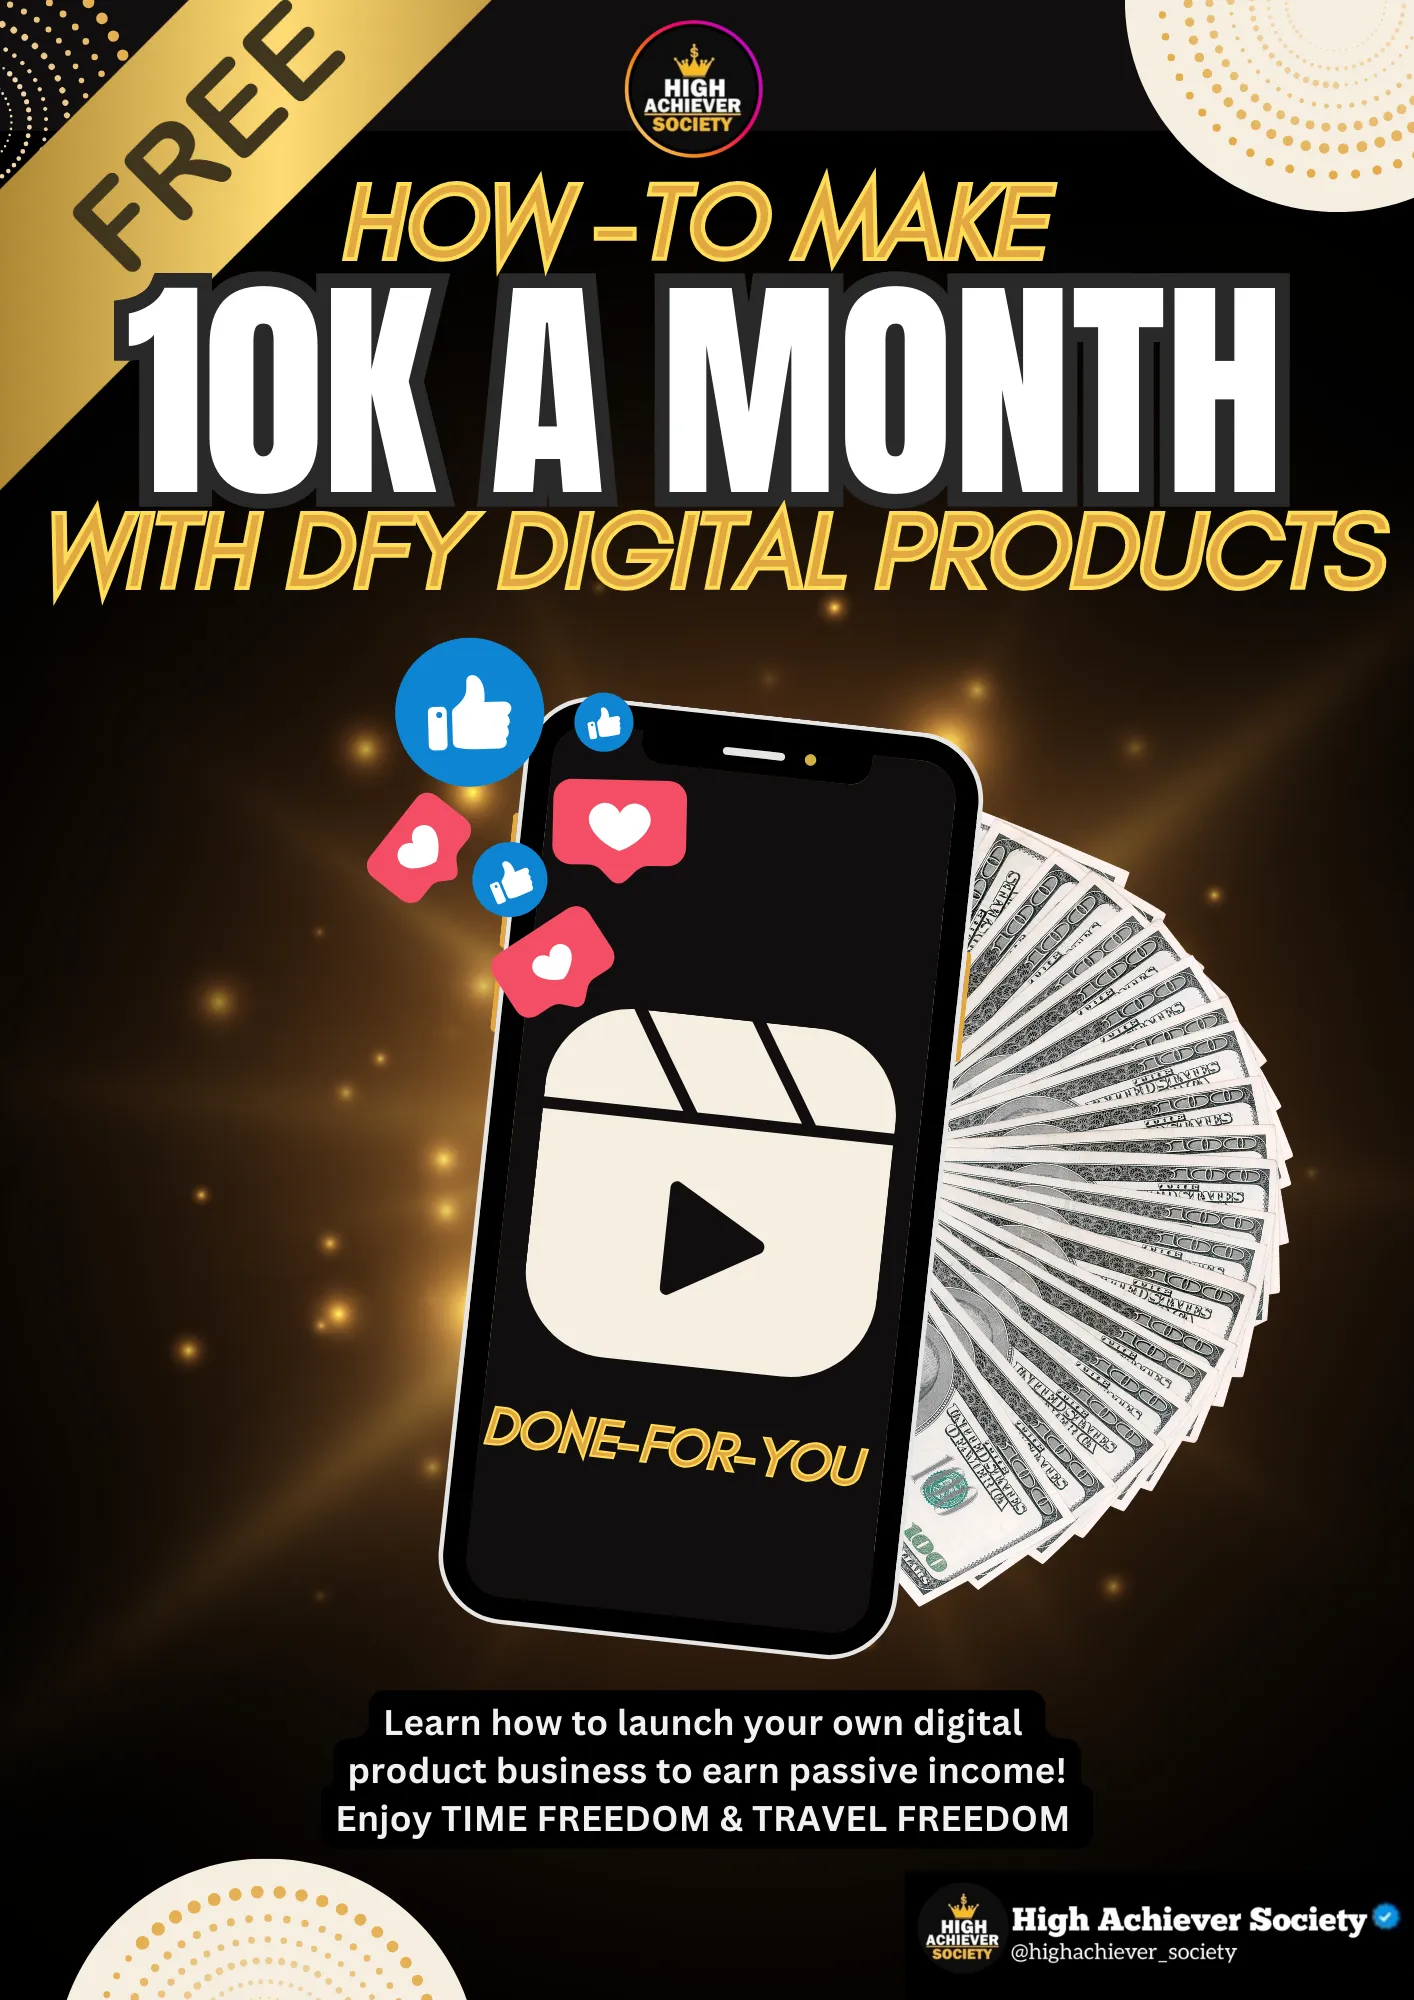 How-to Make 10K a Month with DFY Digital Products